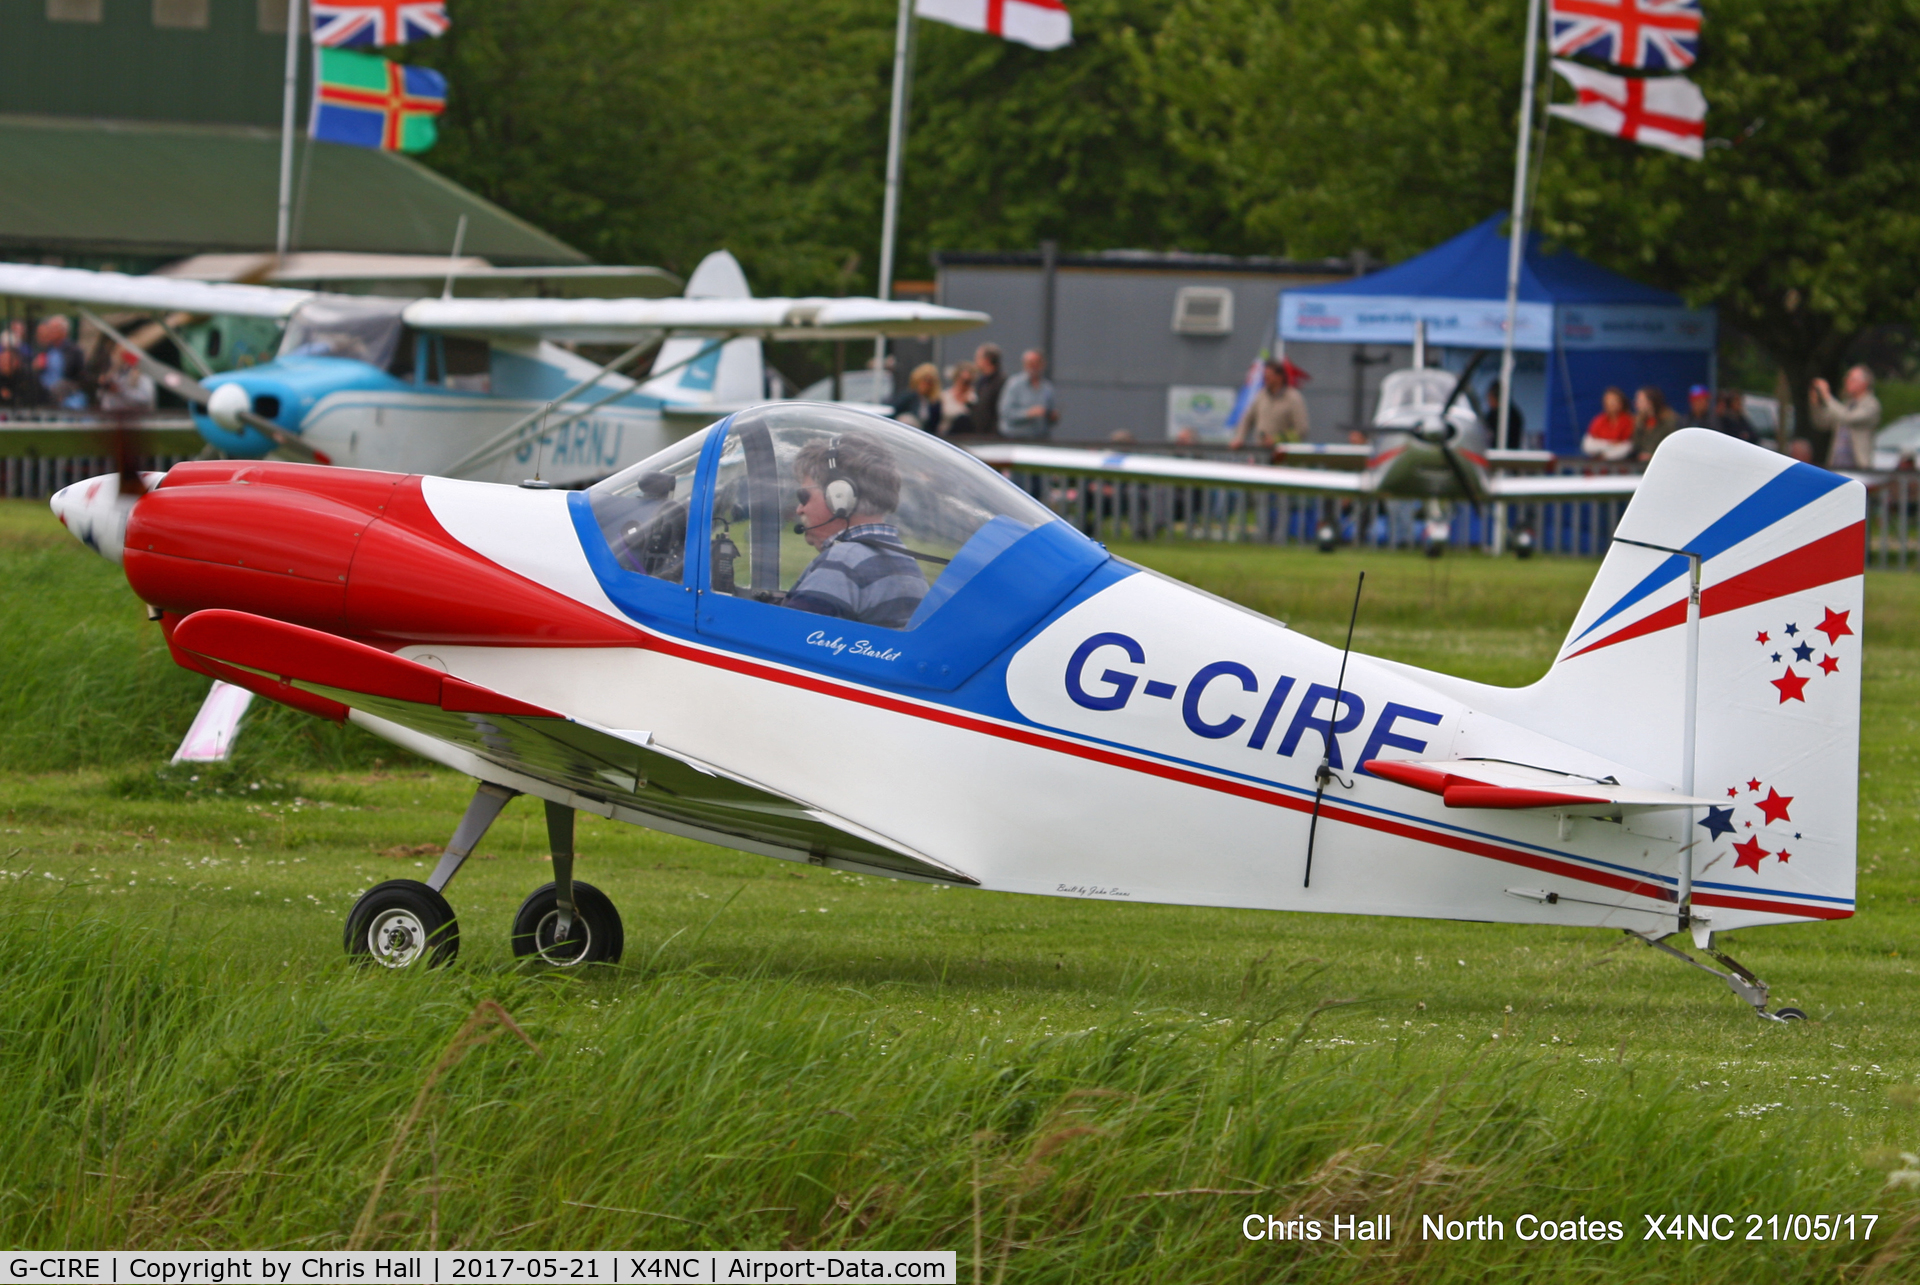 G-CIRE, 2015 Corby CJ-1 Starlet C/N LAA 134-14806, North Coates Summer fly in